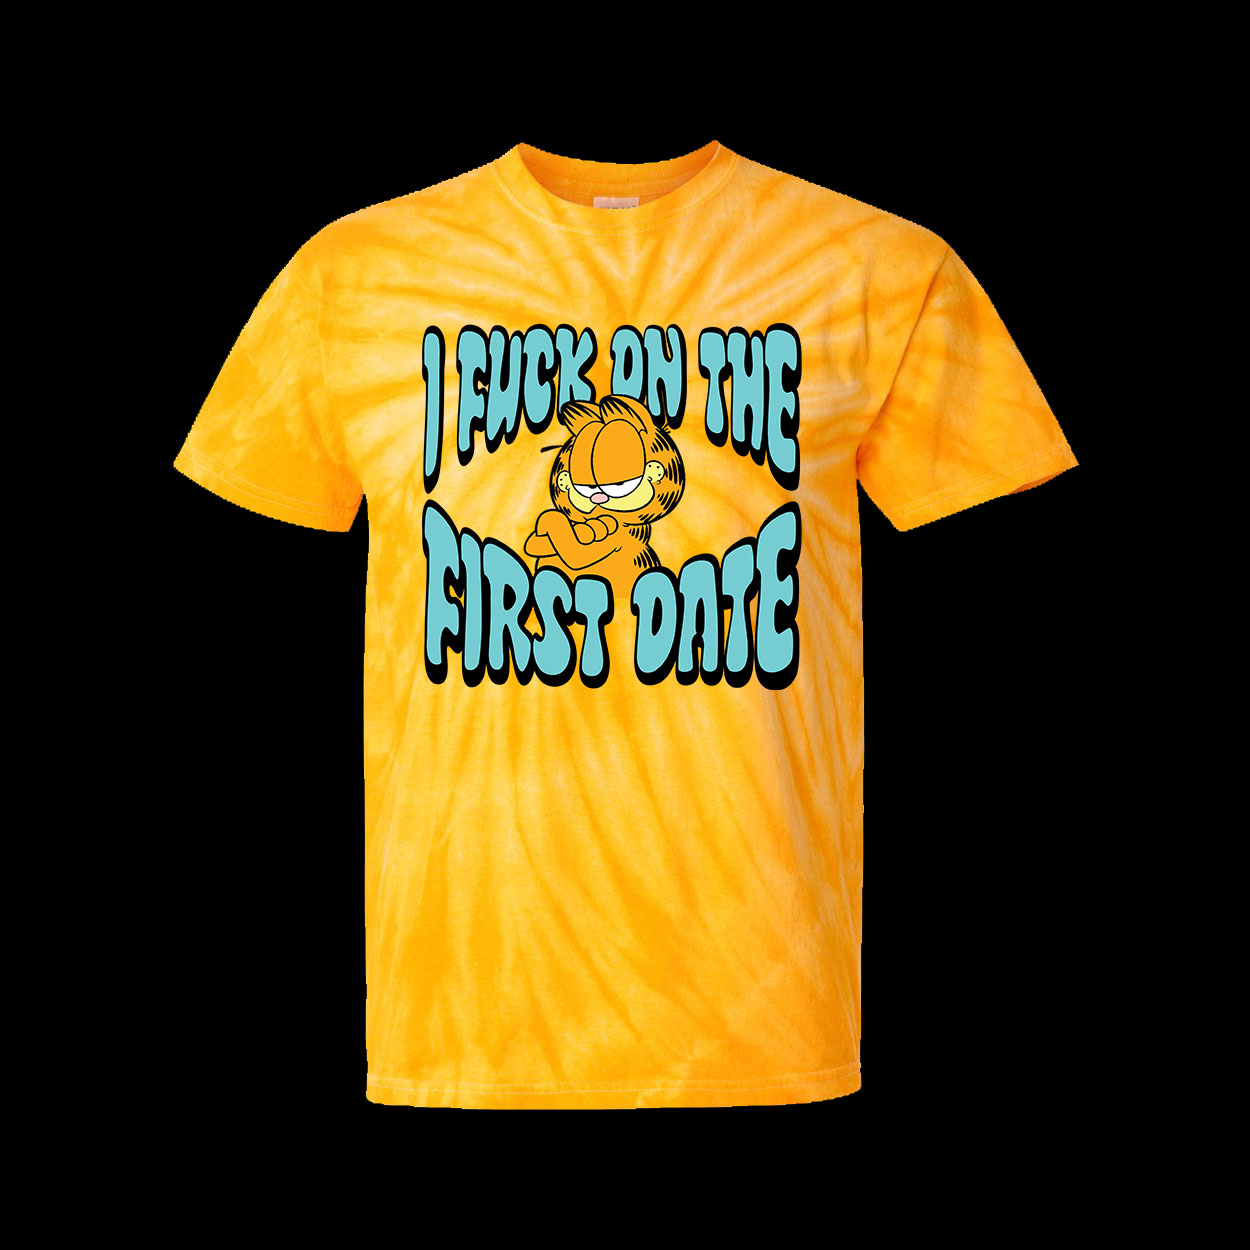 Accidie I fuck on the first date Gold Tie Dye T-shirt